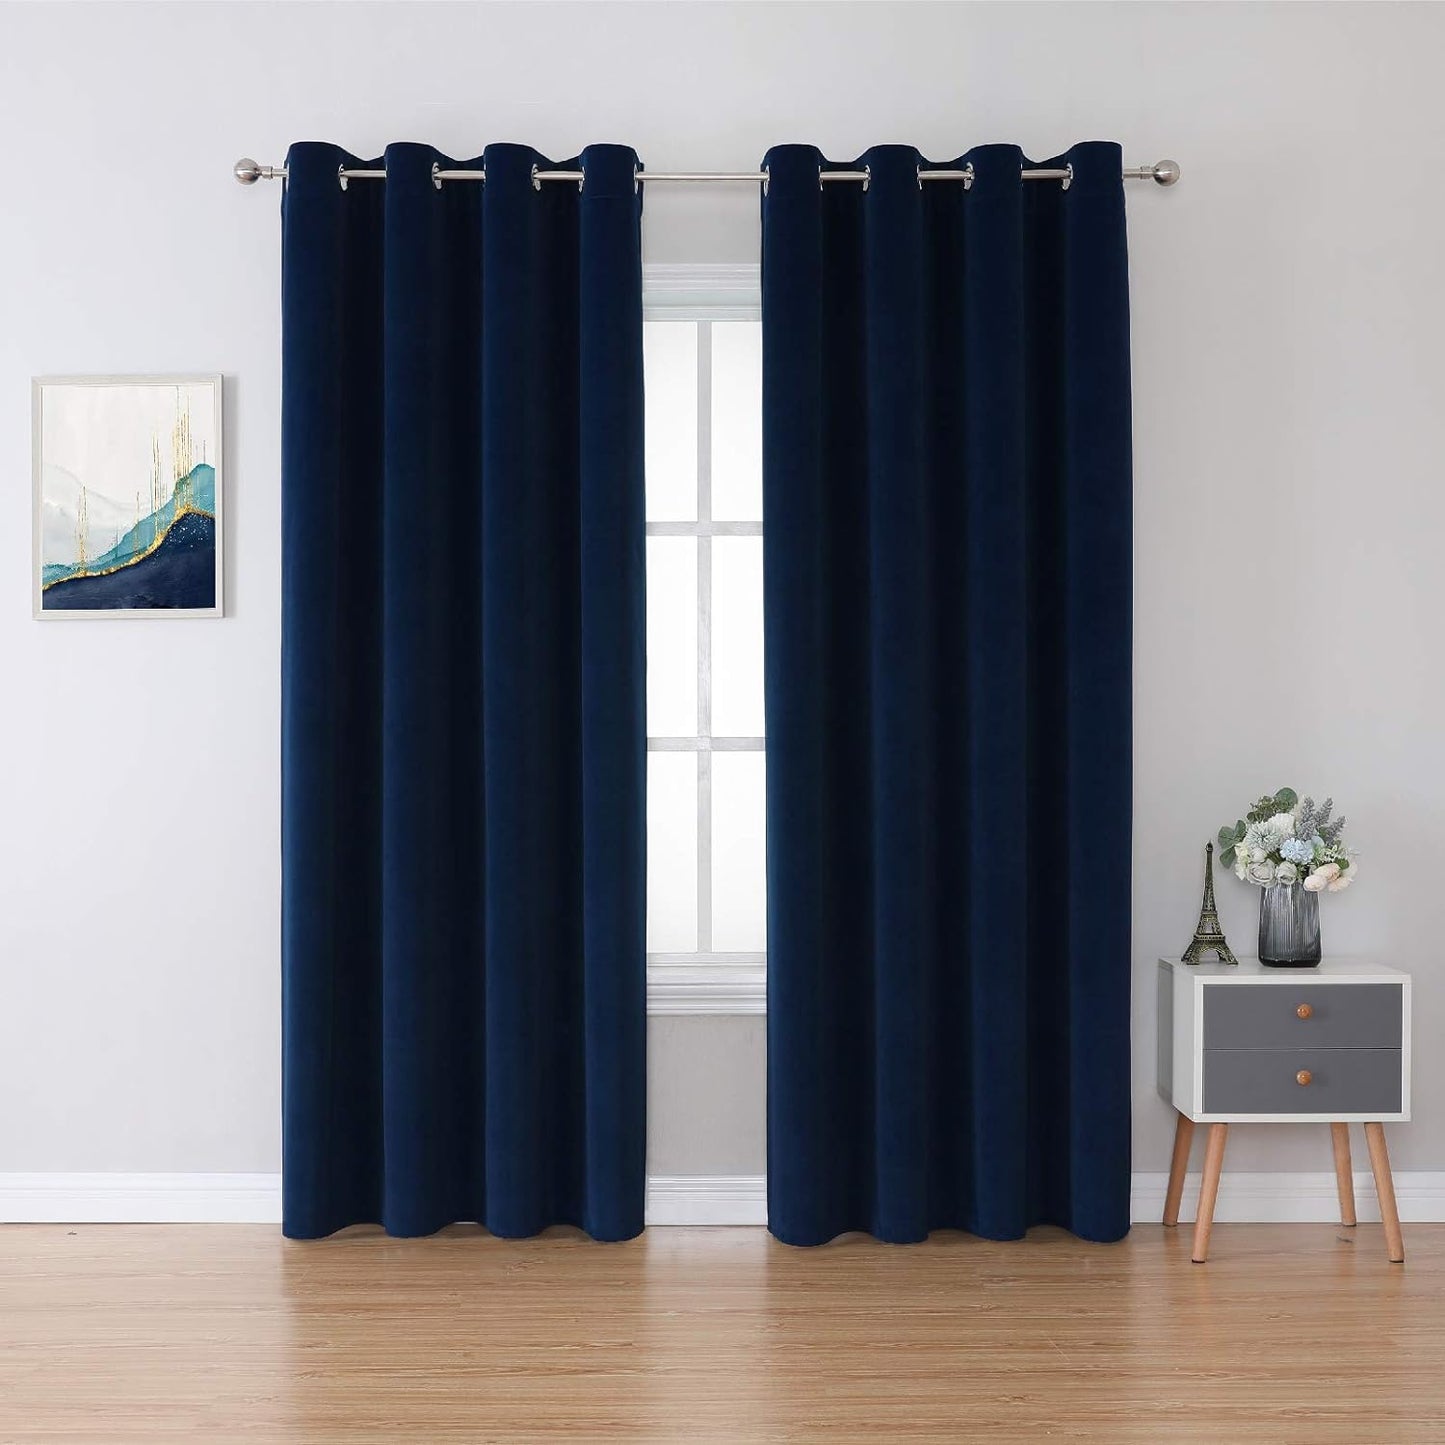 BERSWAY 99% Blackout Curtains & Drapes Panels 84 Inches Darkening Curtains - Thermal Insulated Curtain for Bedroom-Red 84 Inches Long Grommet Window Curtain 2 Panels Set,W 52" X L 84"  BERSWAY Rb-Blue 52"Wx95"L 